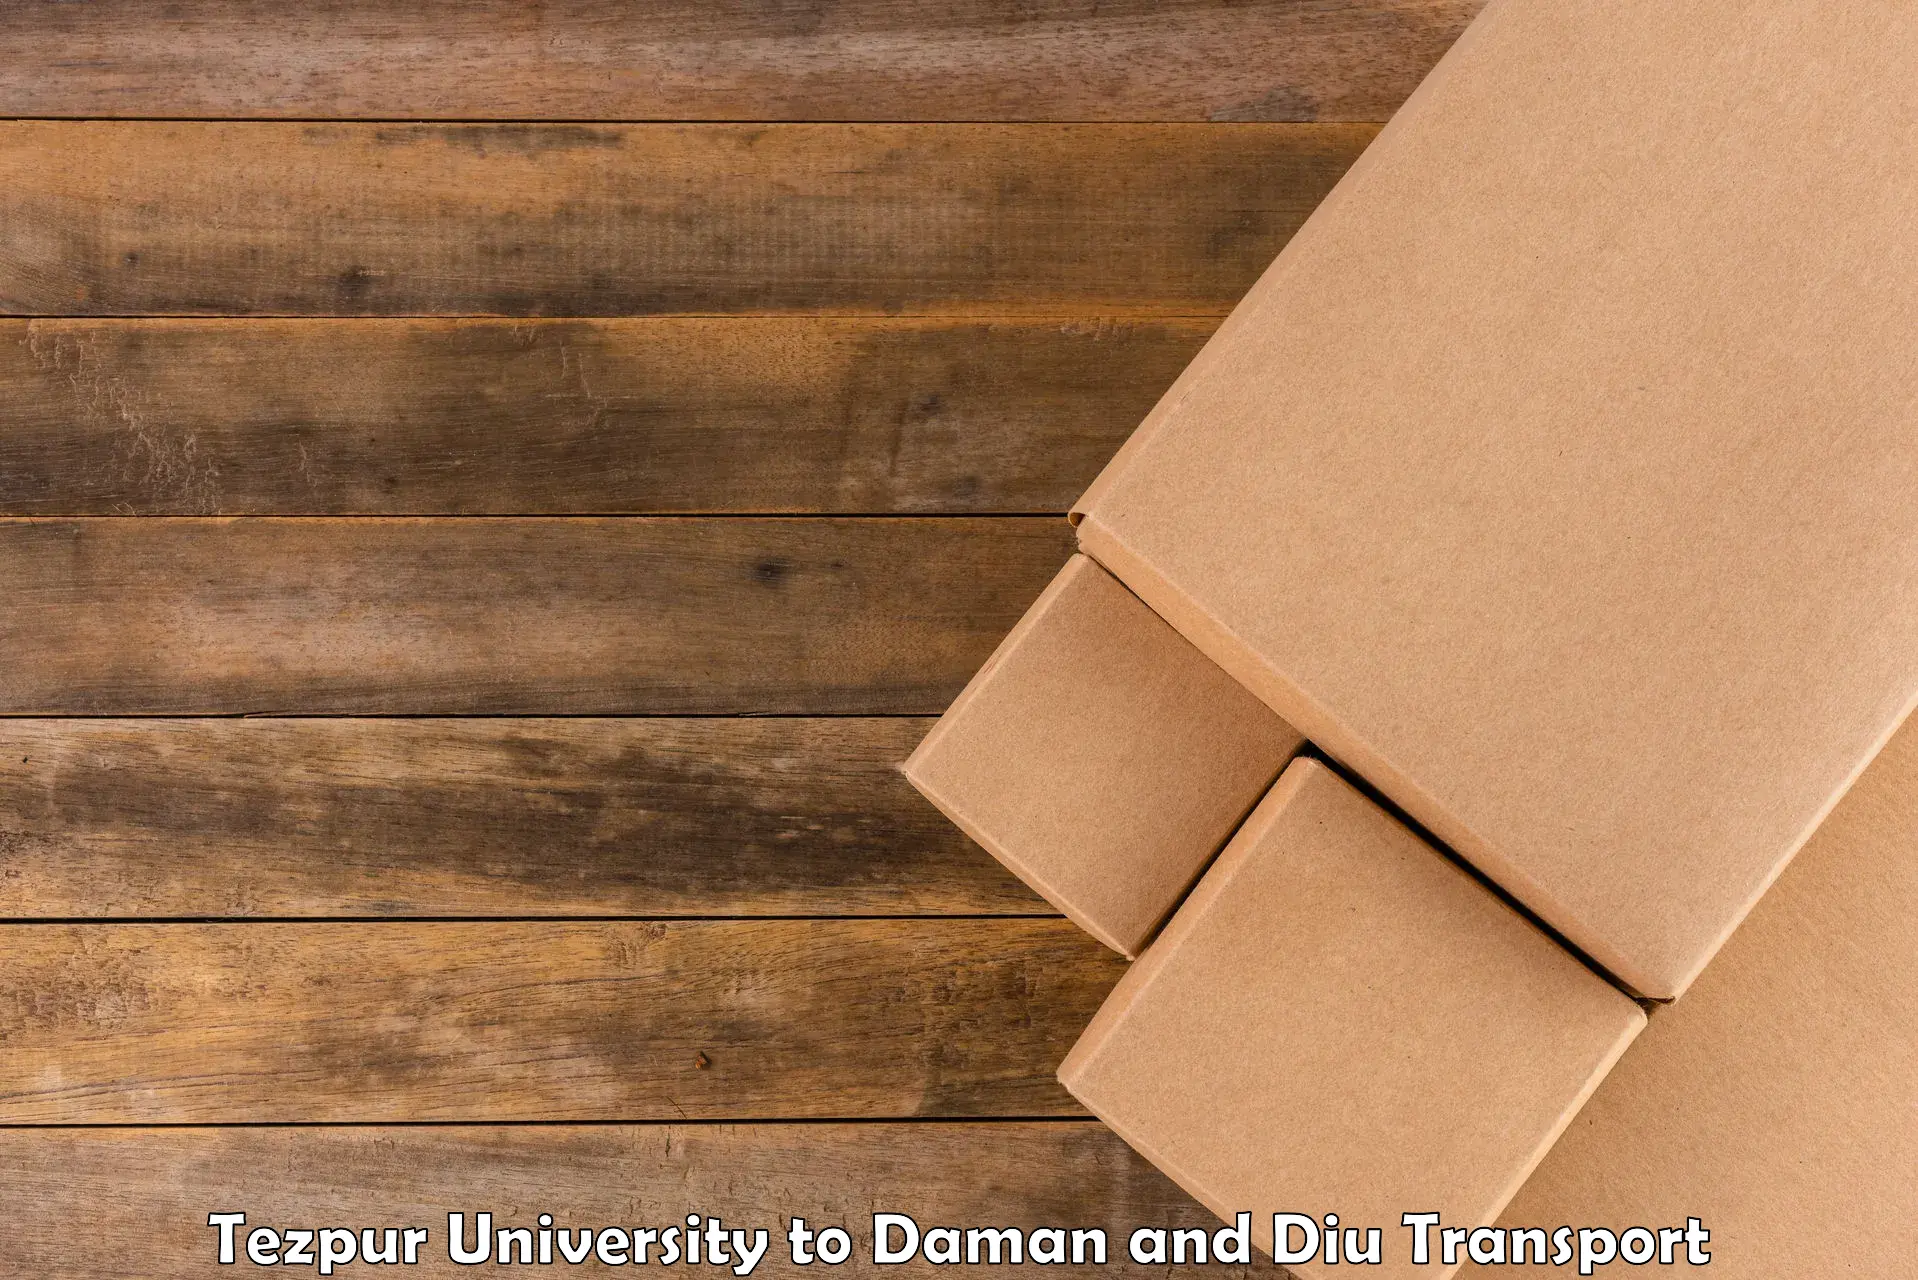 Domestic goods transportation services Tezpur University to Daman and Diu